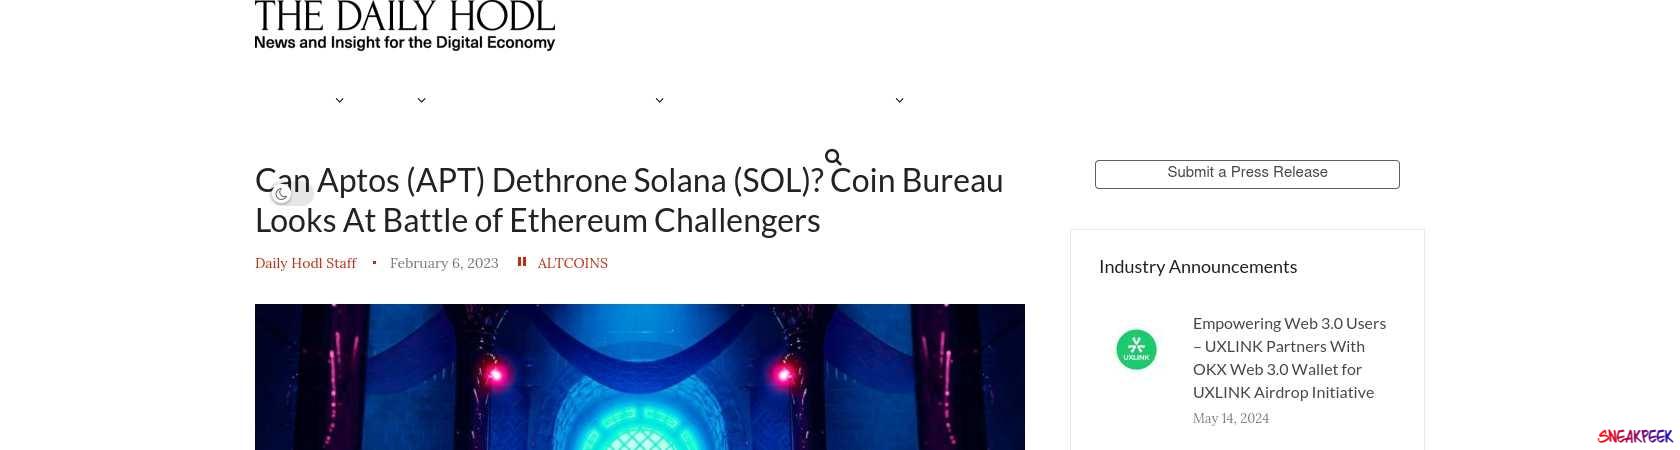 Read the full Article:  ⭲ Can Aptos (APT) Dethrone Solana (SOL)? Coin Bureau Looks At Battle of Ethereum Challengers